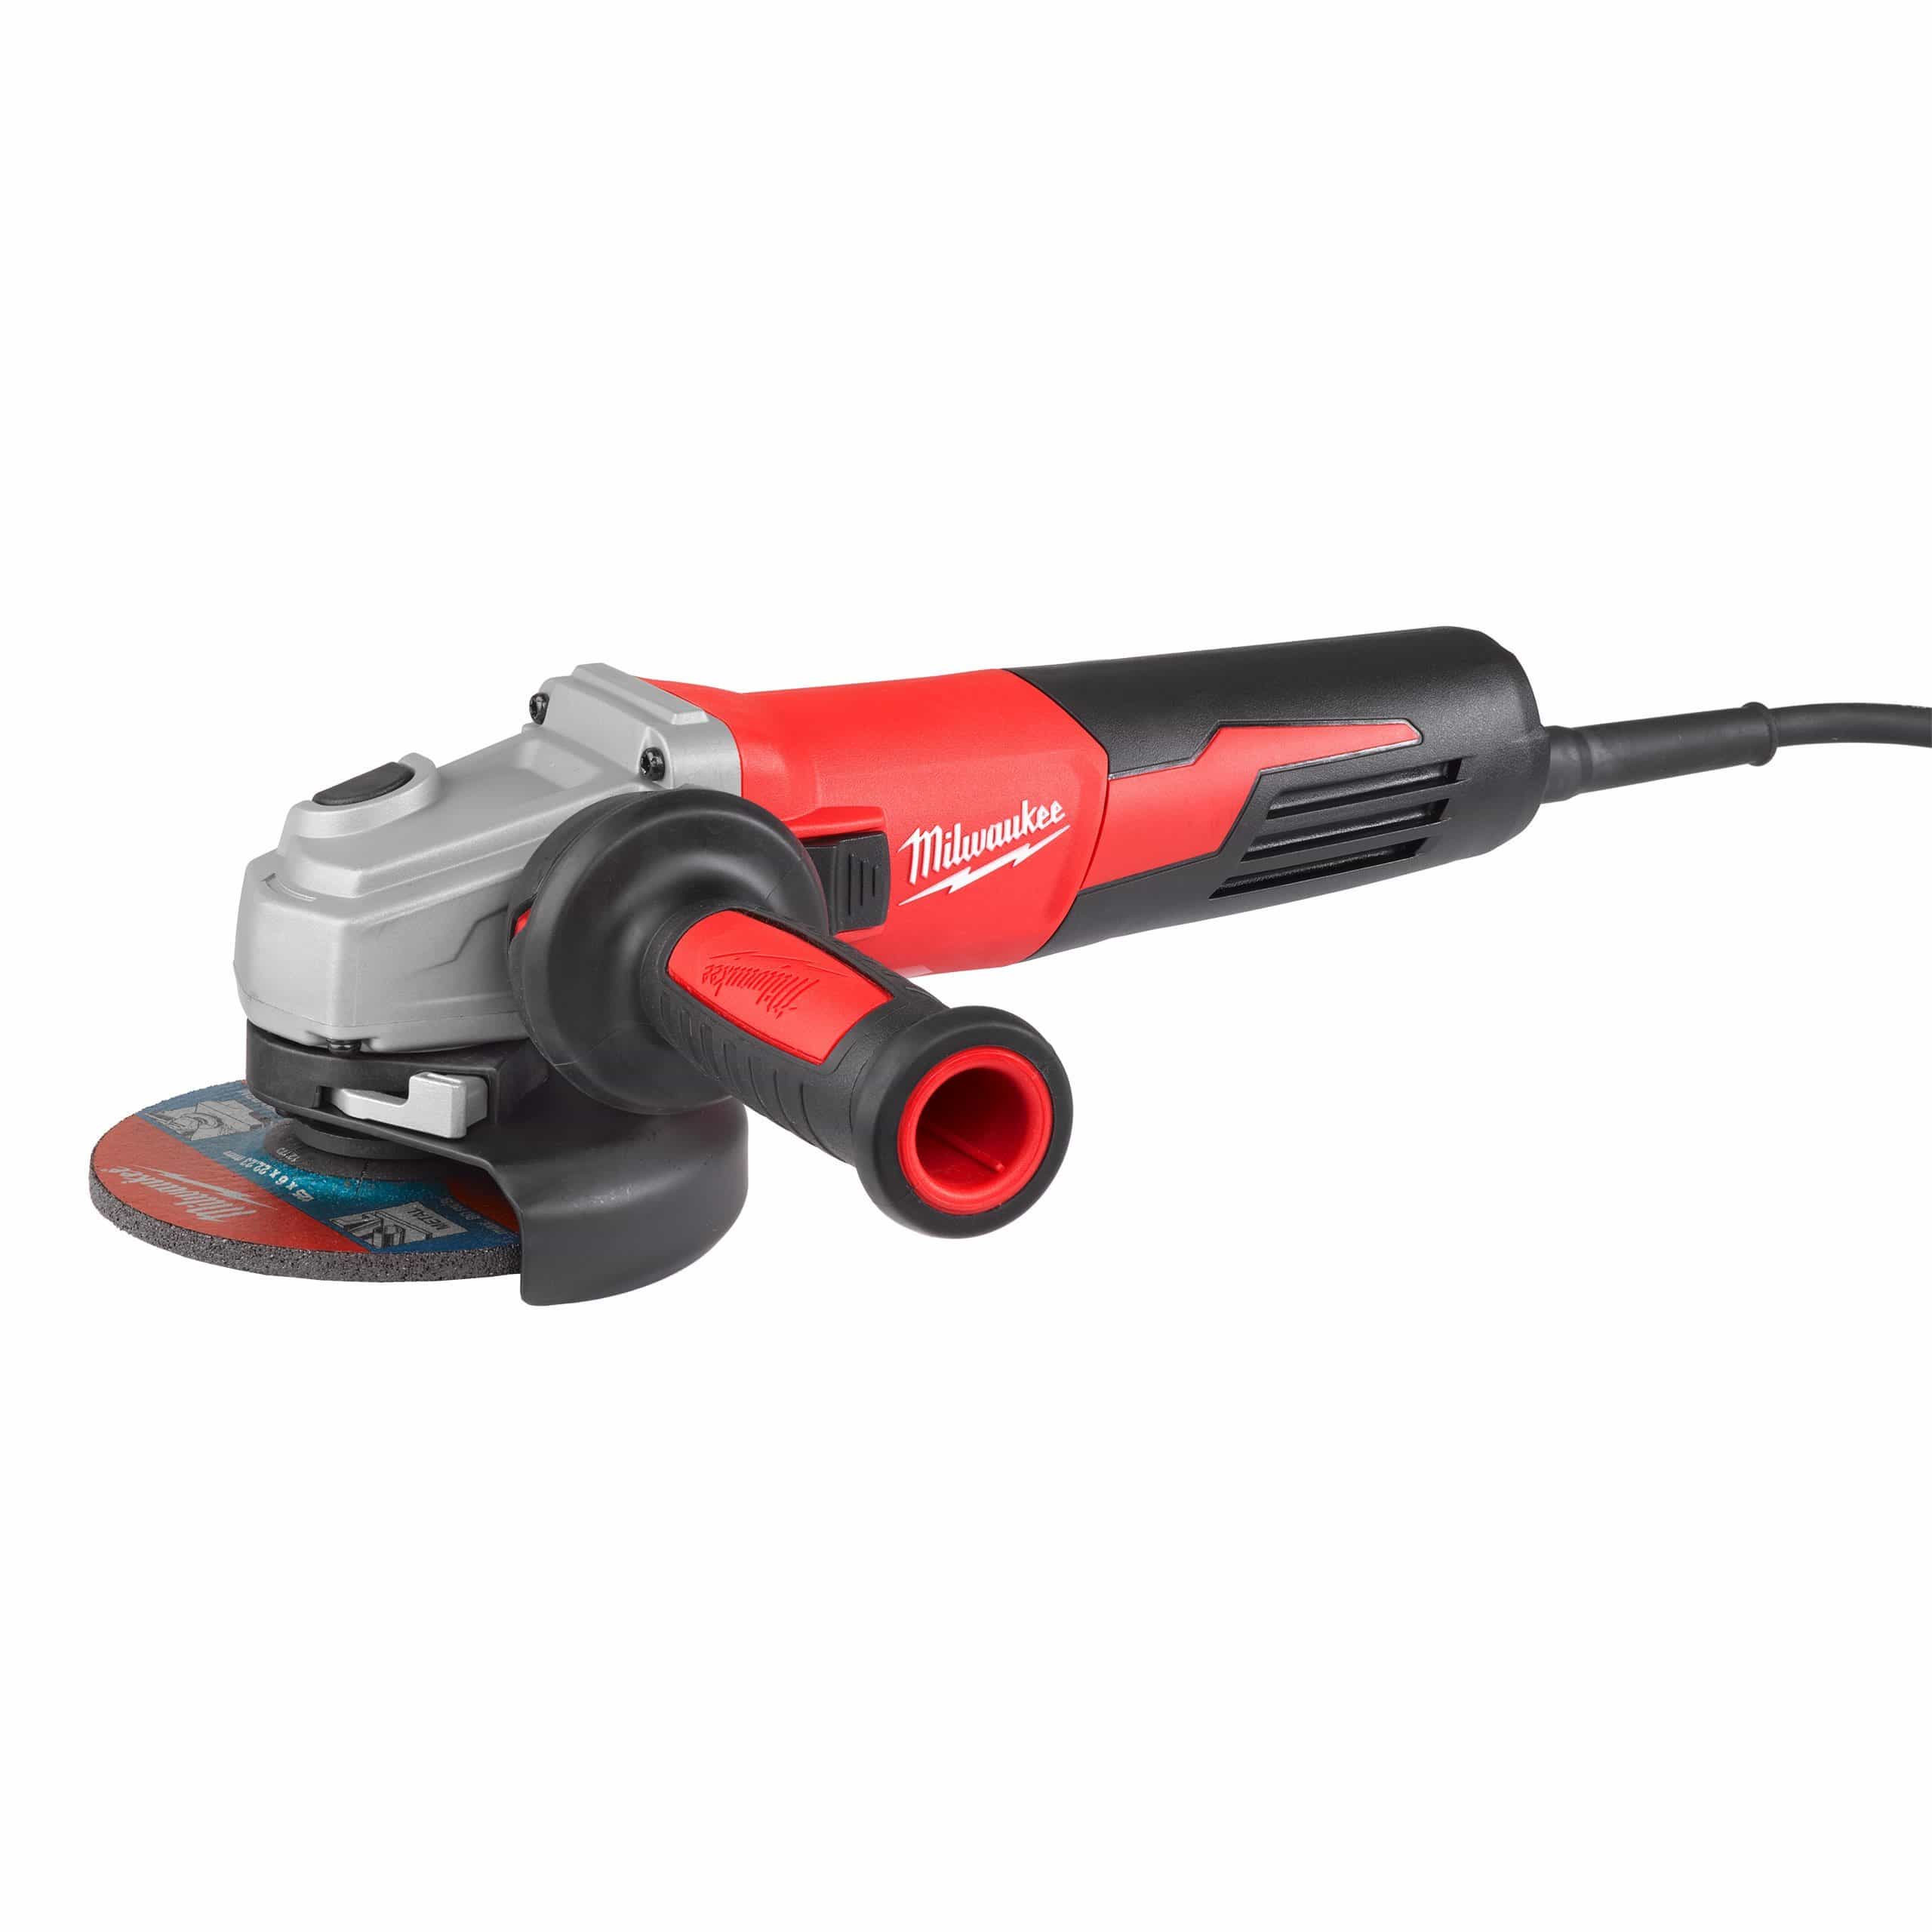 Milwaukee Angle Grinder 125mm 1250W with AVS & Slide Switch - AGV 13-125 XE | Supply Master | Accra, Ghana Tools Building Steel Engineering Hardware tool